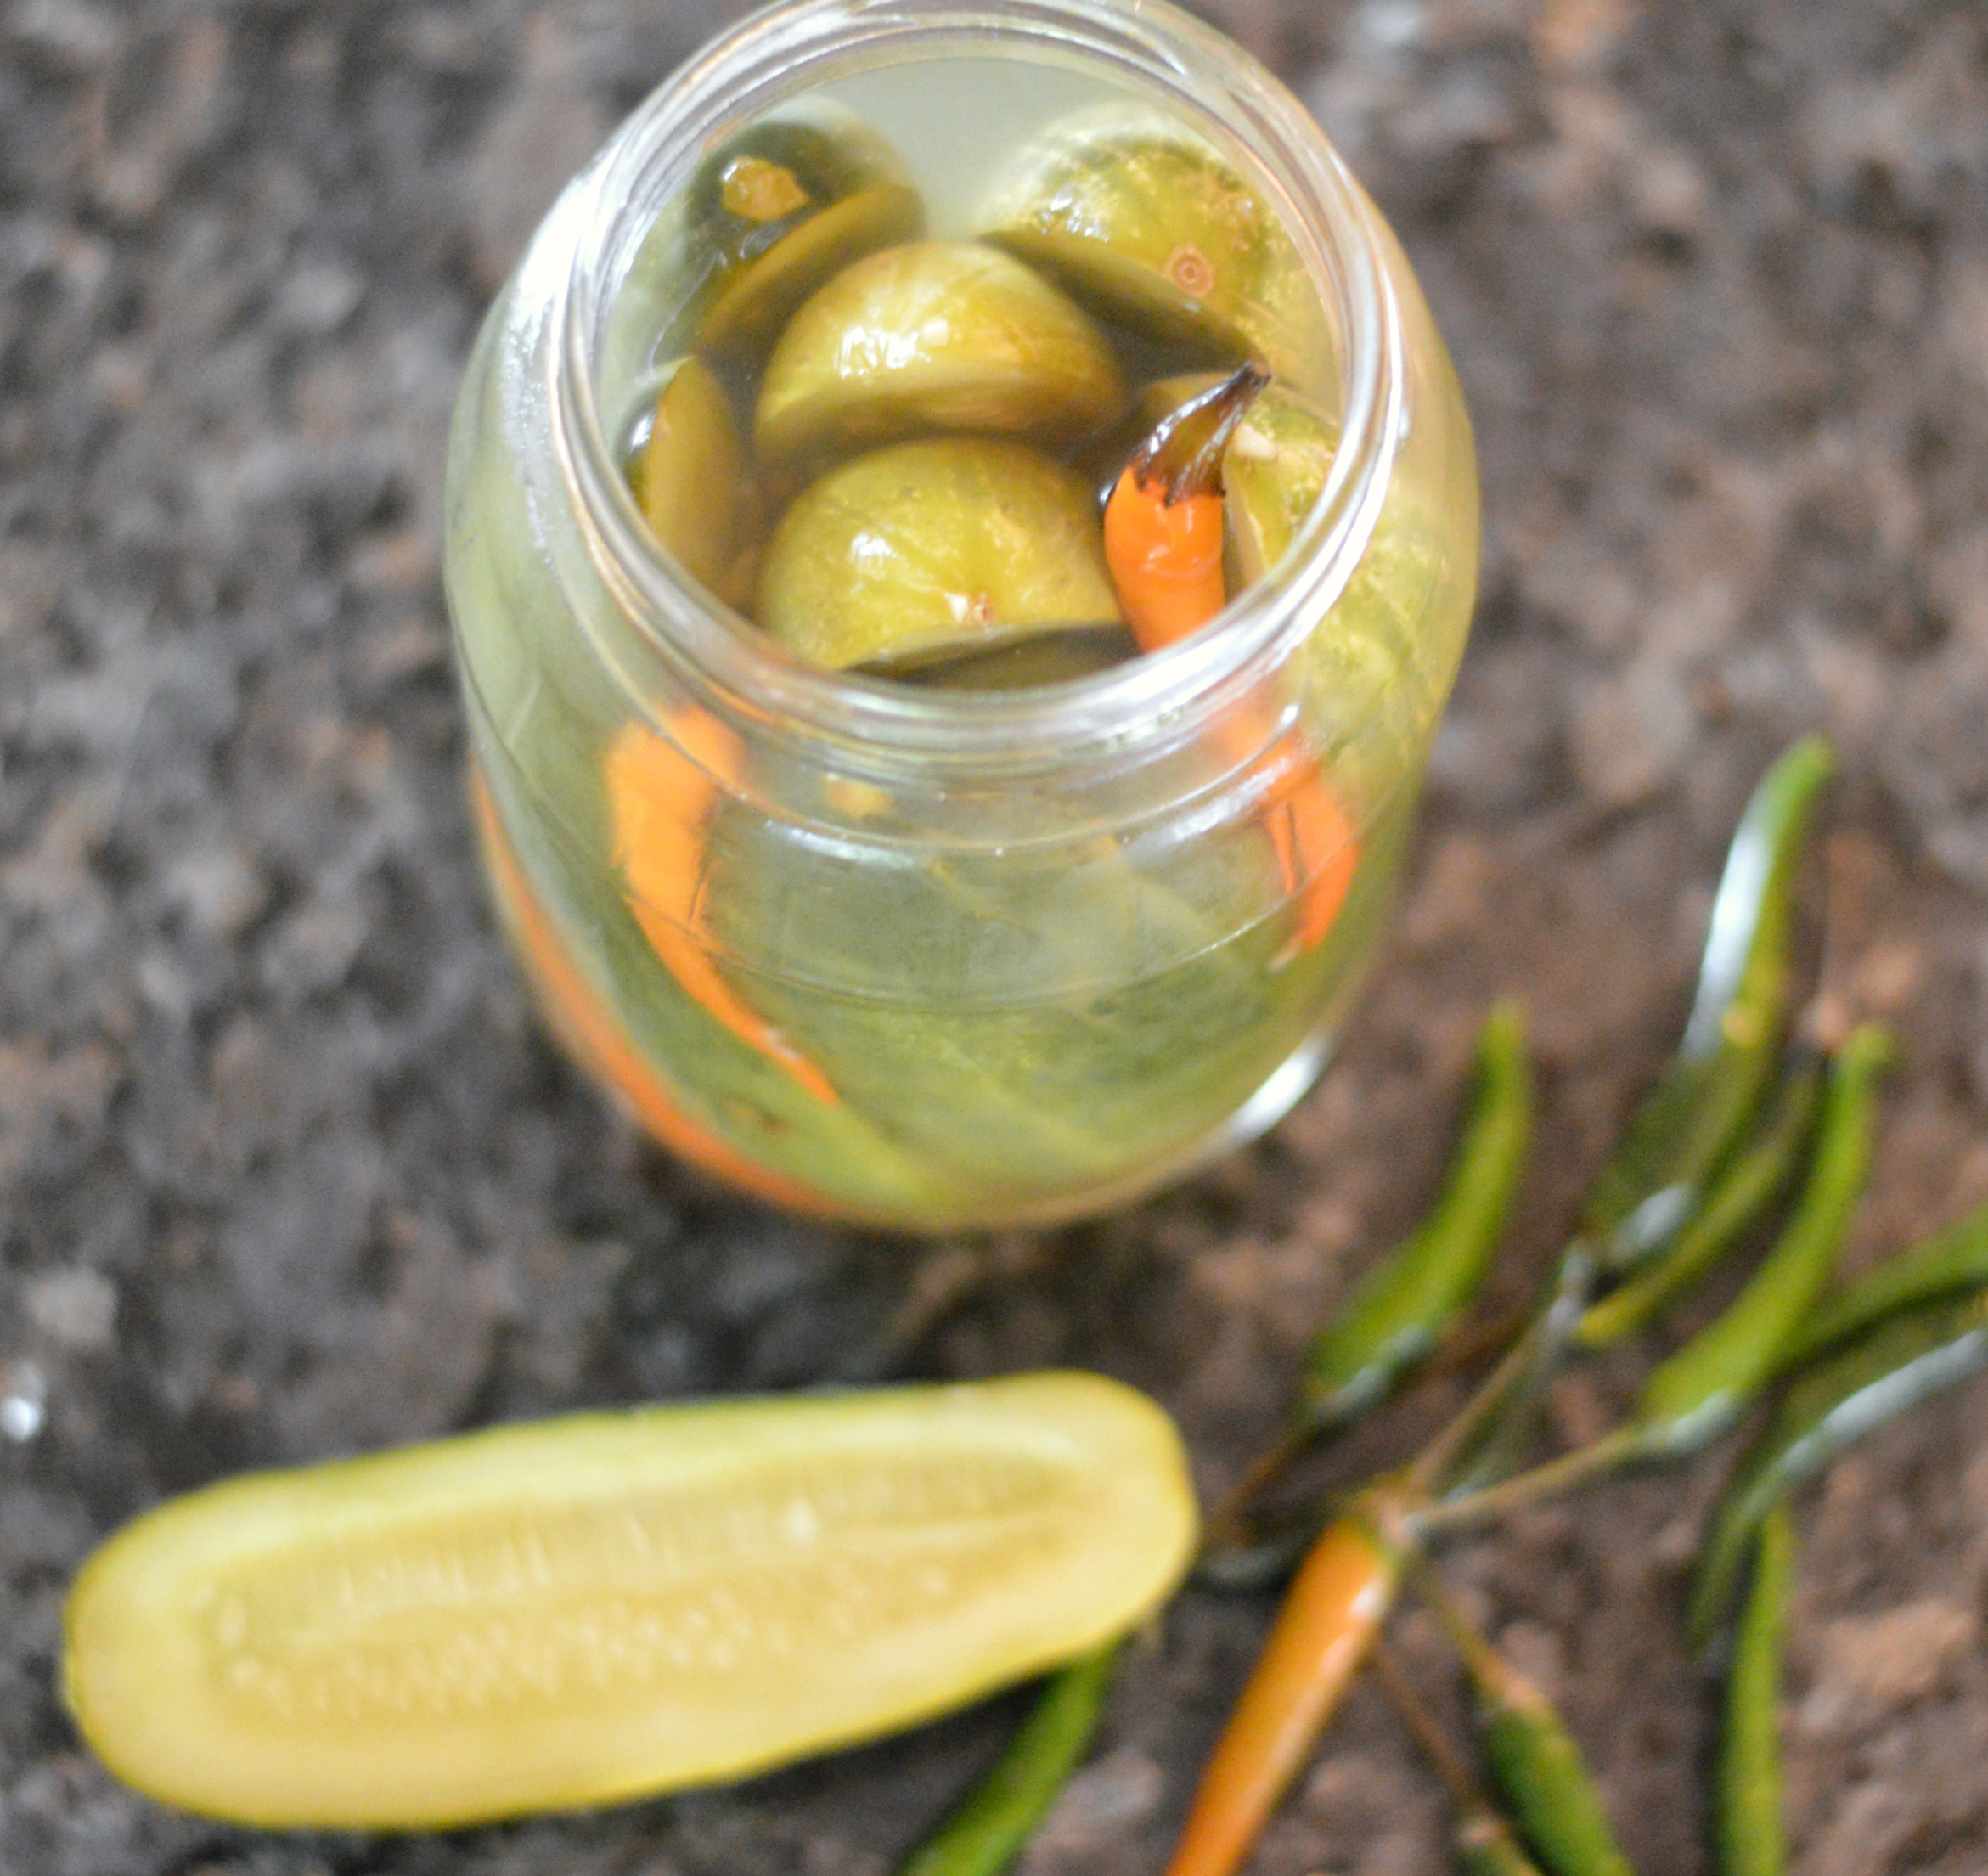 Spicy Quick Pickles